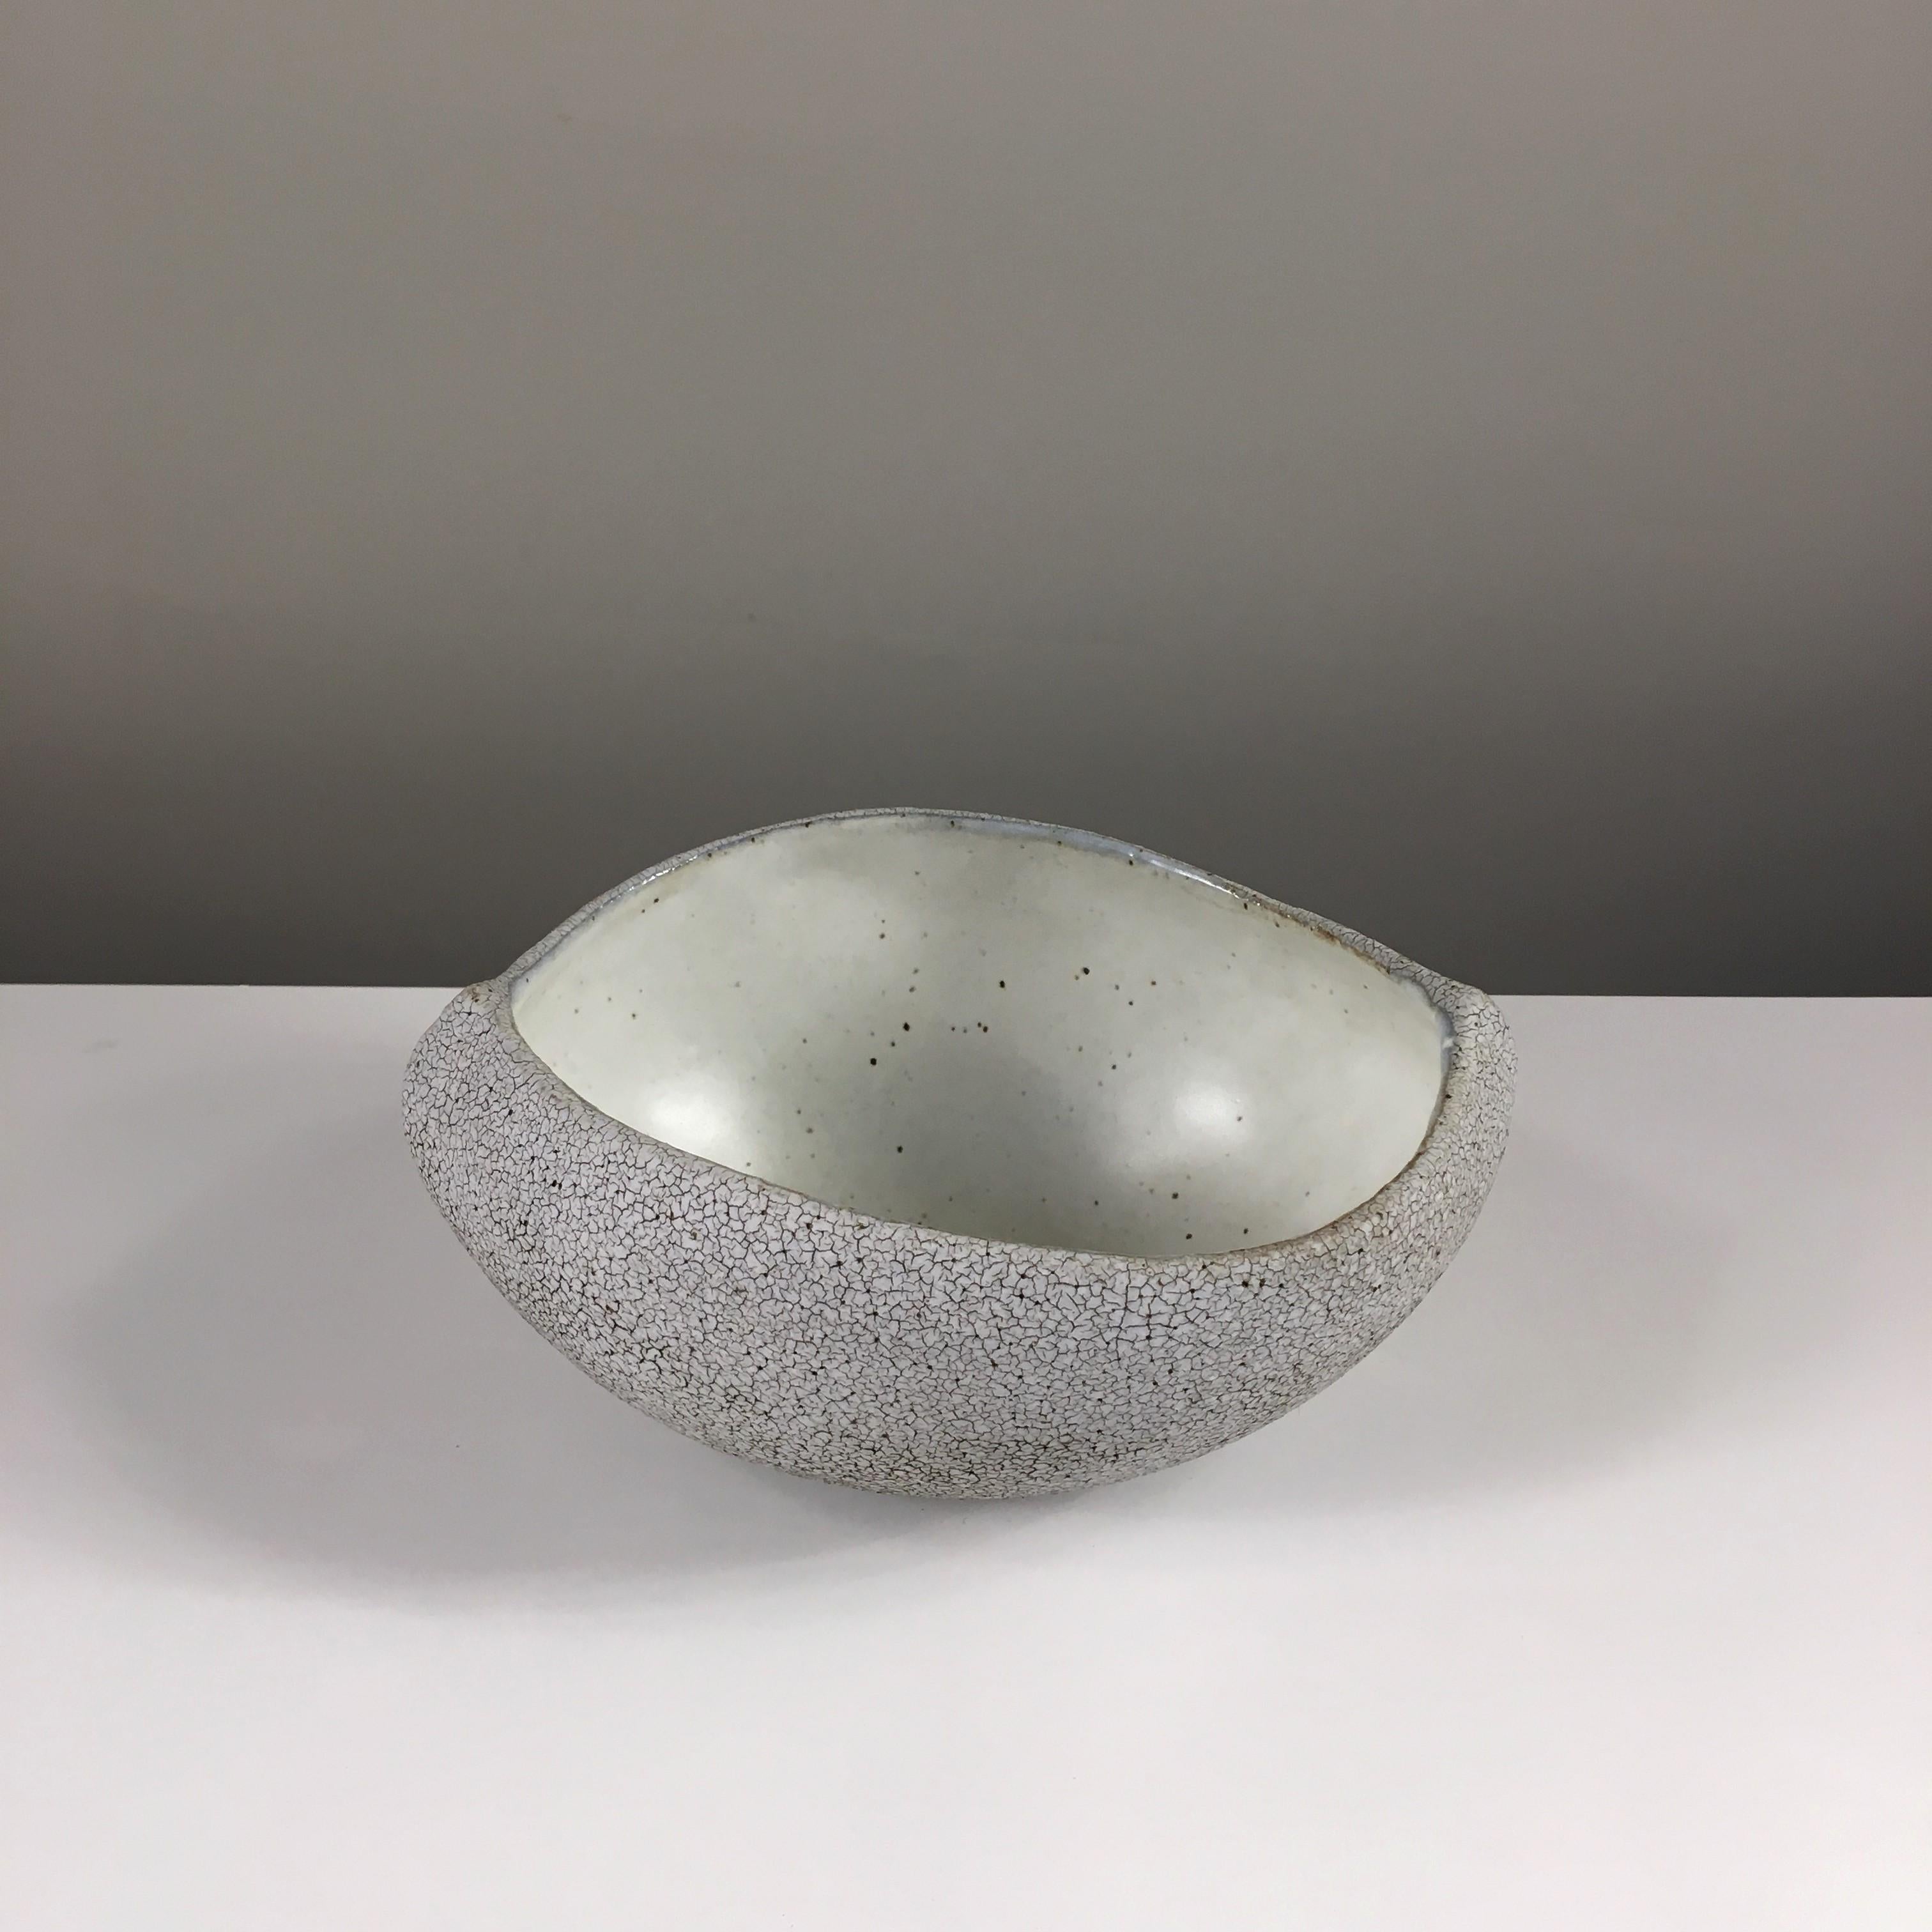 Organic Modern Boat Shaped Bowl with Inner Light Grey Glaze by Yumiko Kuga For Sale